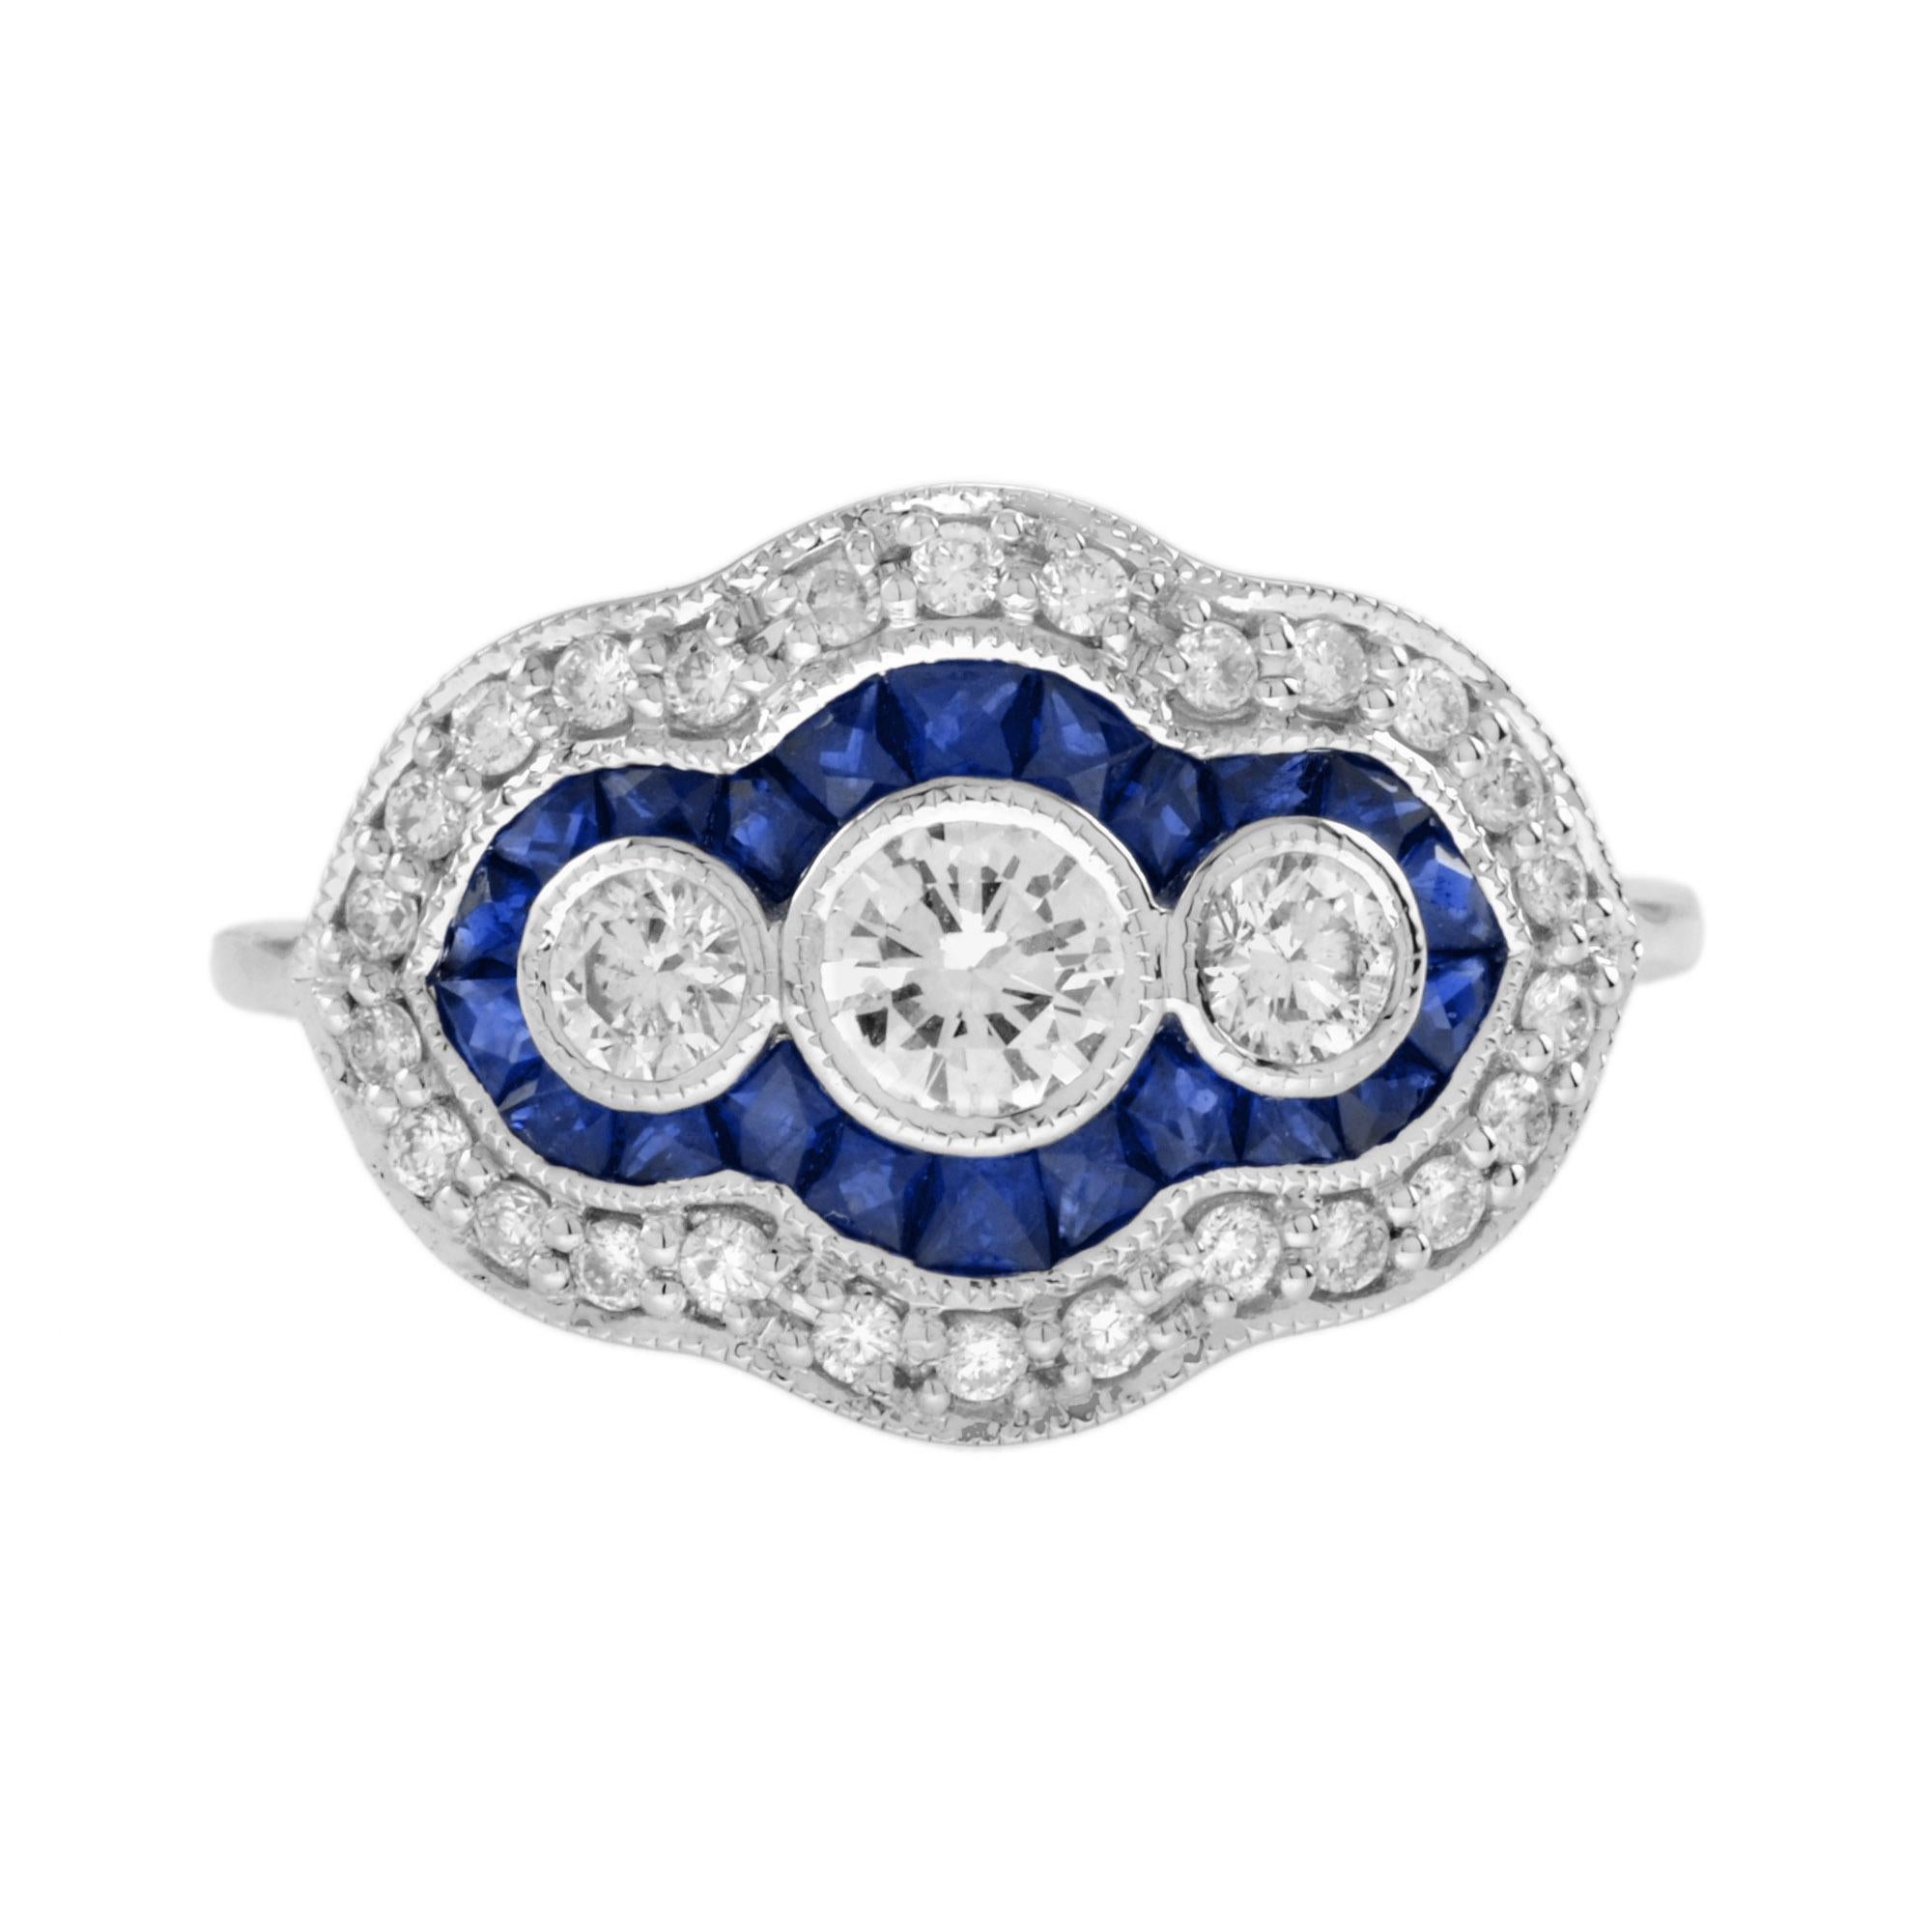 Diamond and Blue Sapphire Art Deco Style Three Stone Ring in 18K White Gold